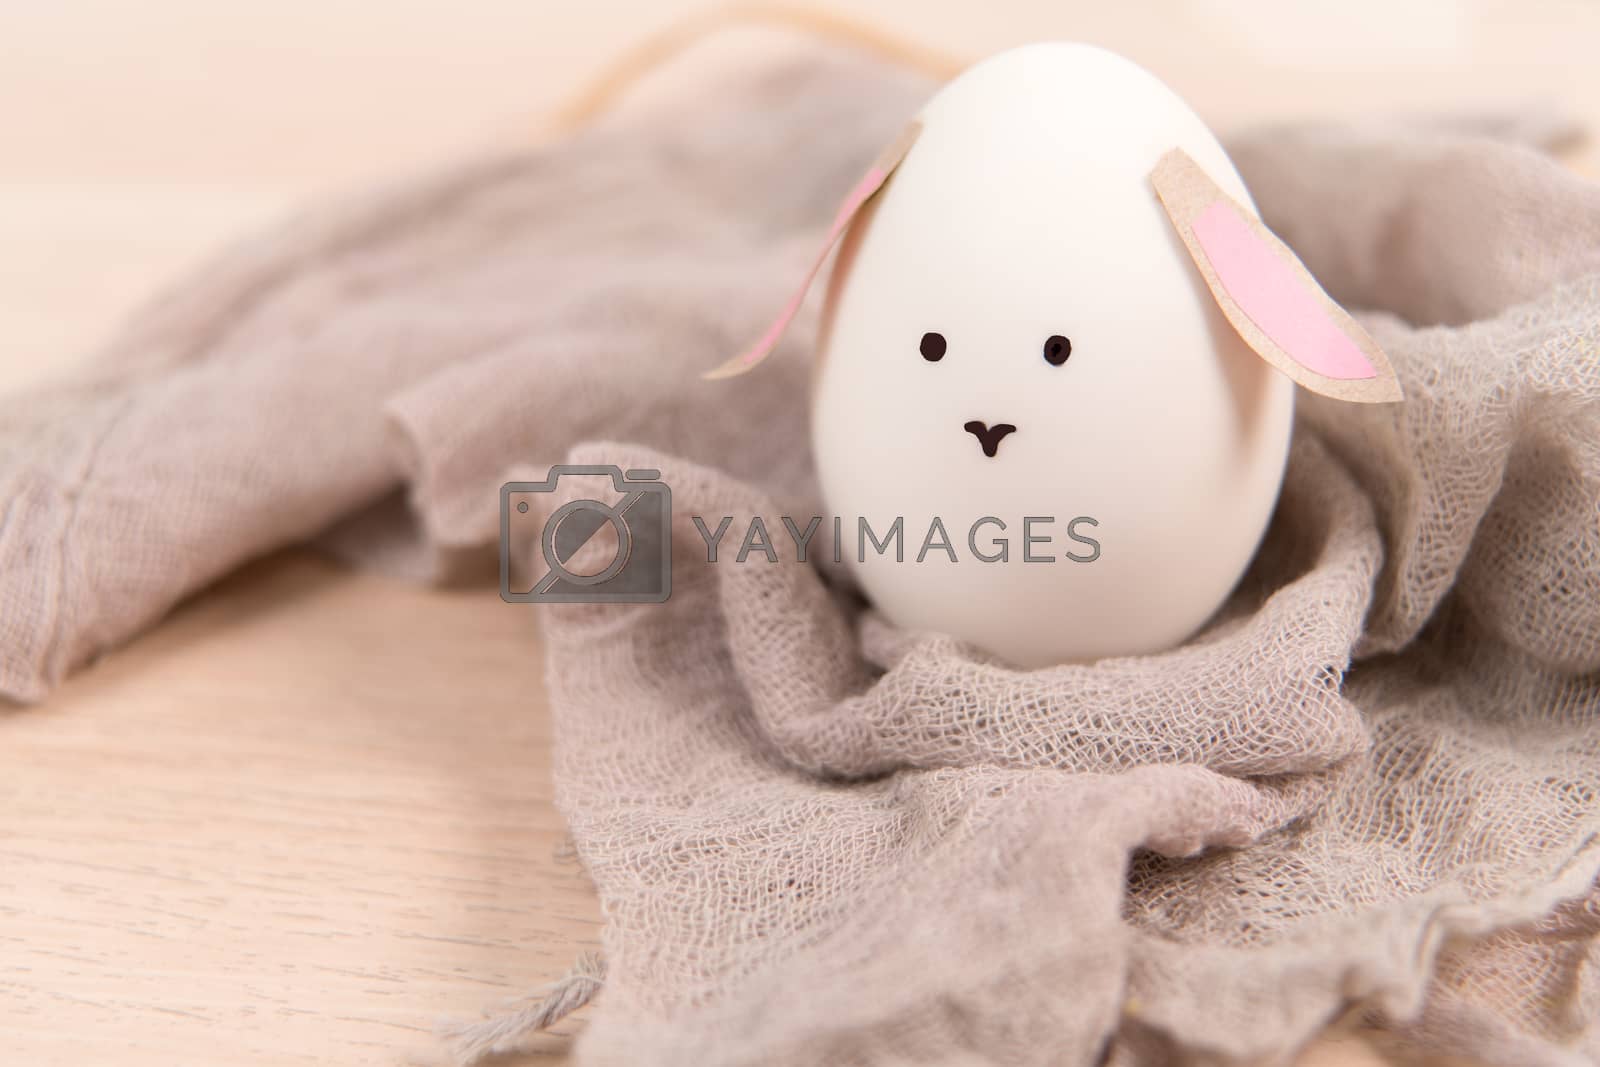 Royalty free image of Happy easter, cute bunny organic easter egg, easter holiday deco by psodaz